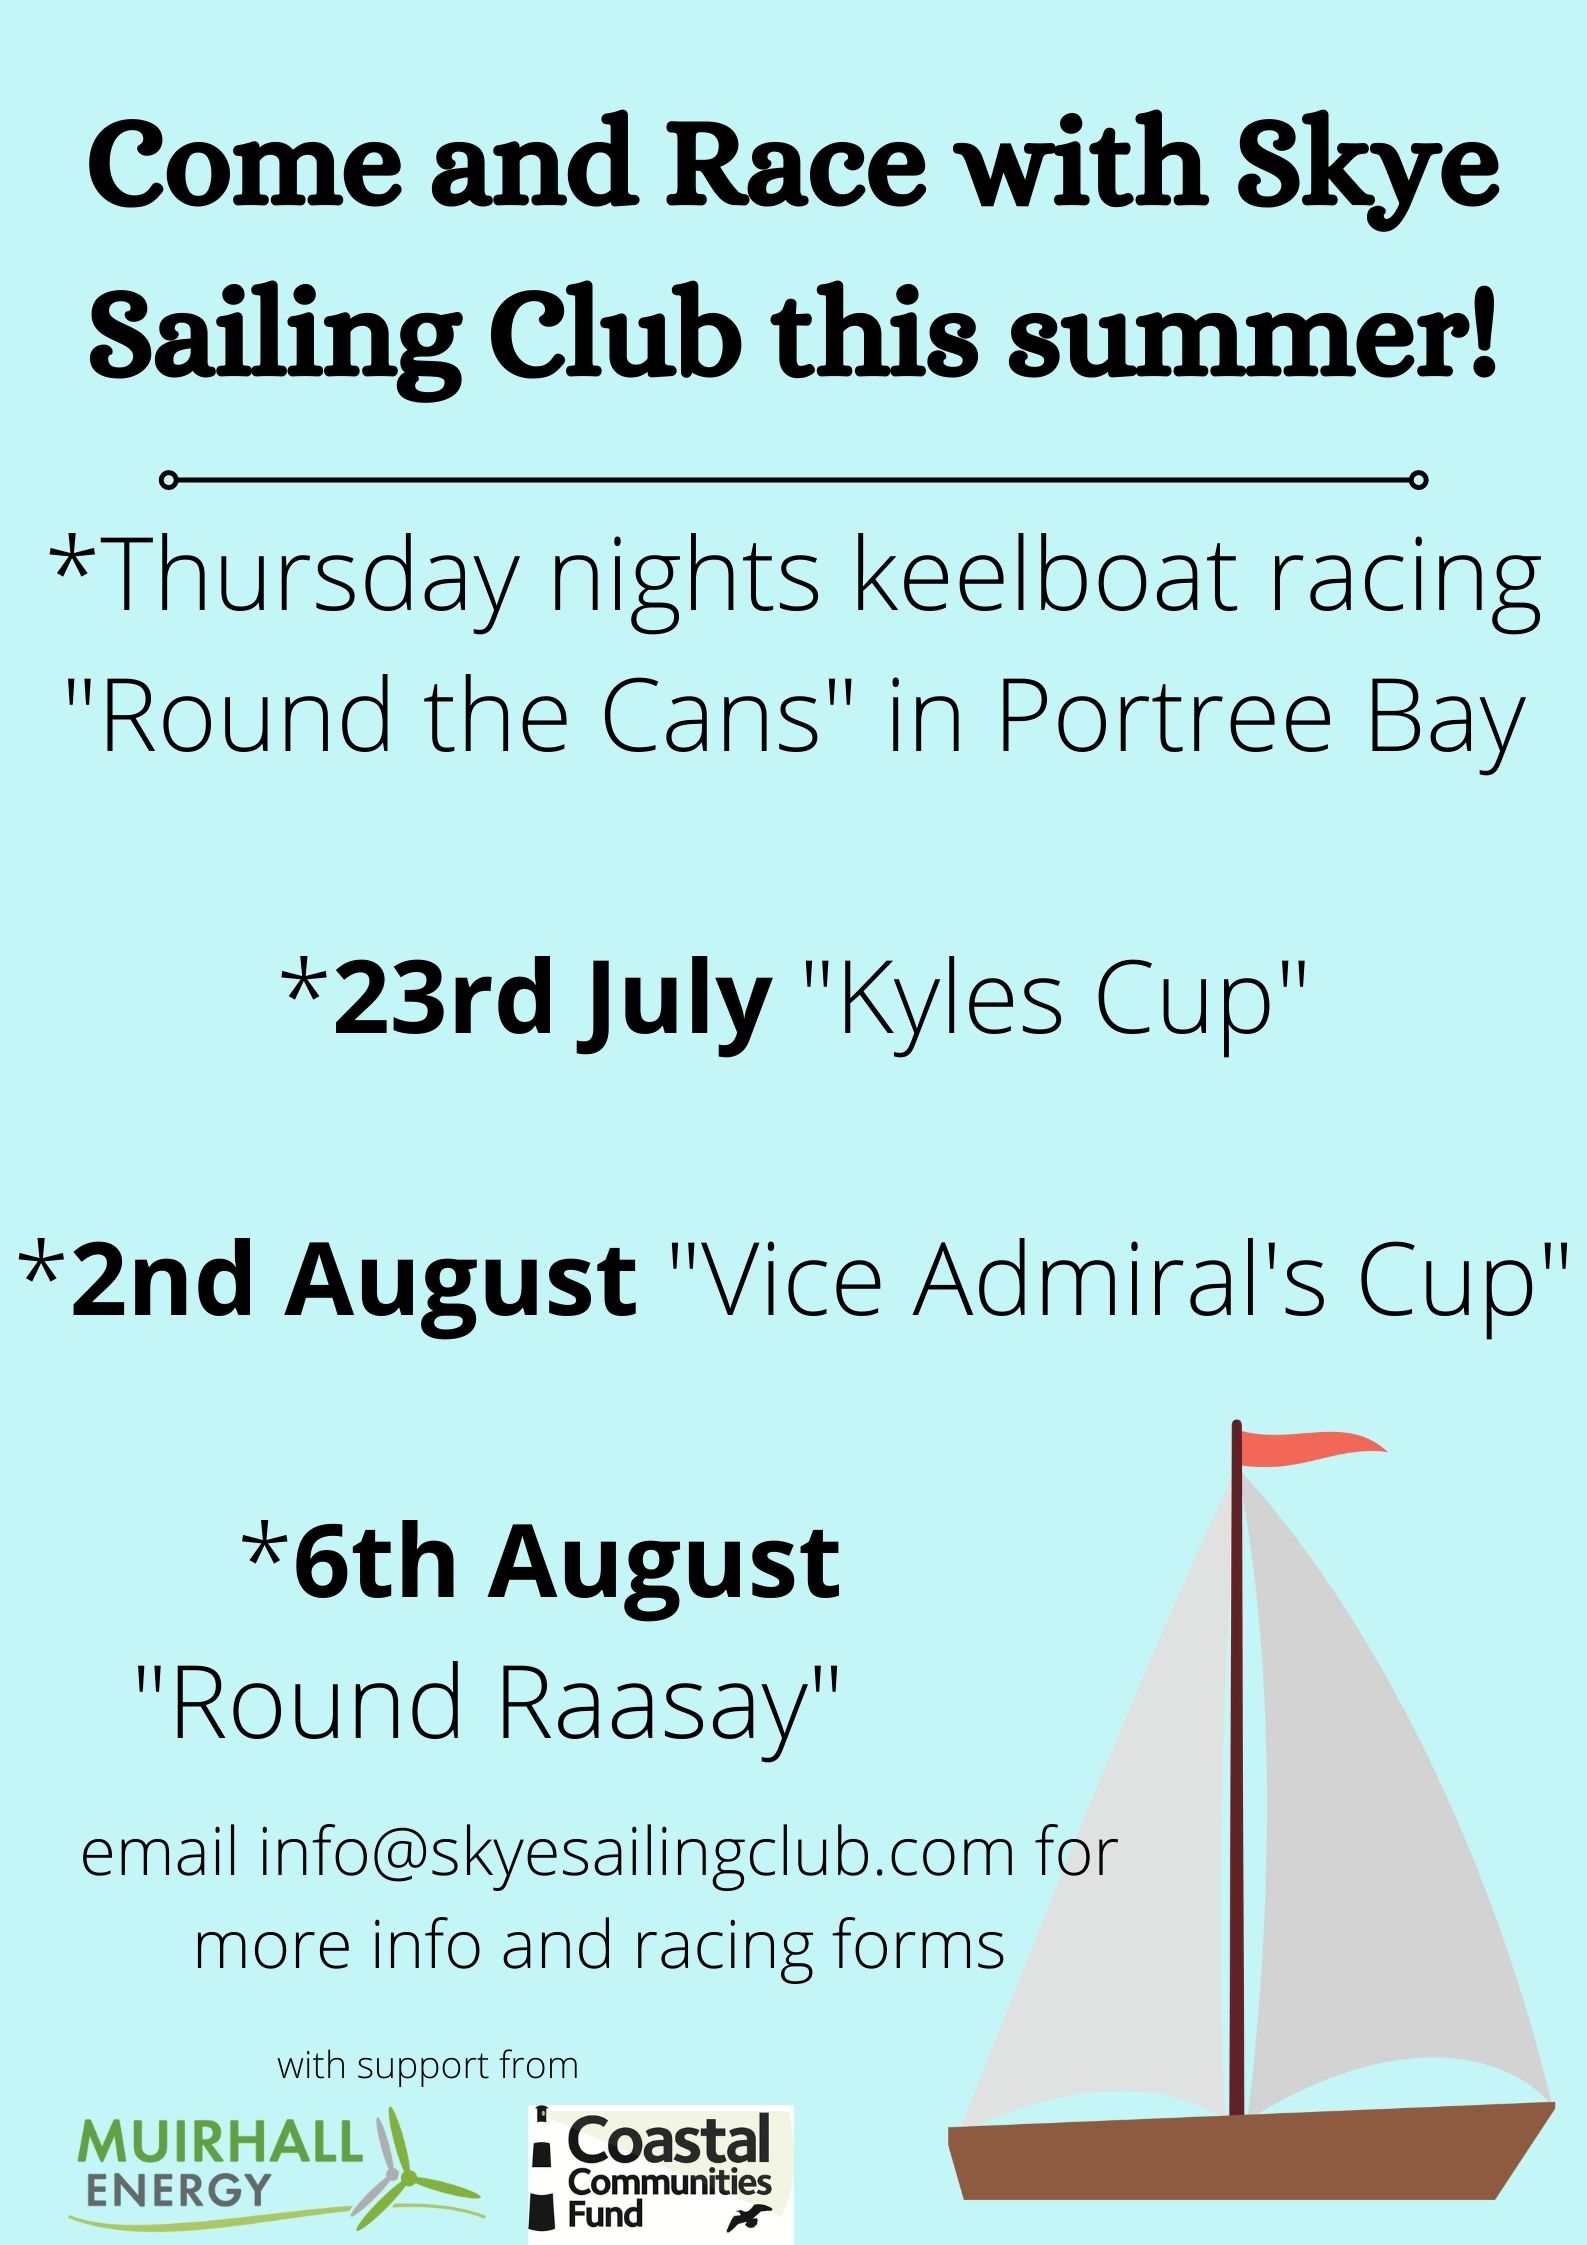 Come and Race with Skye Sailing Club this summer